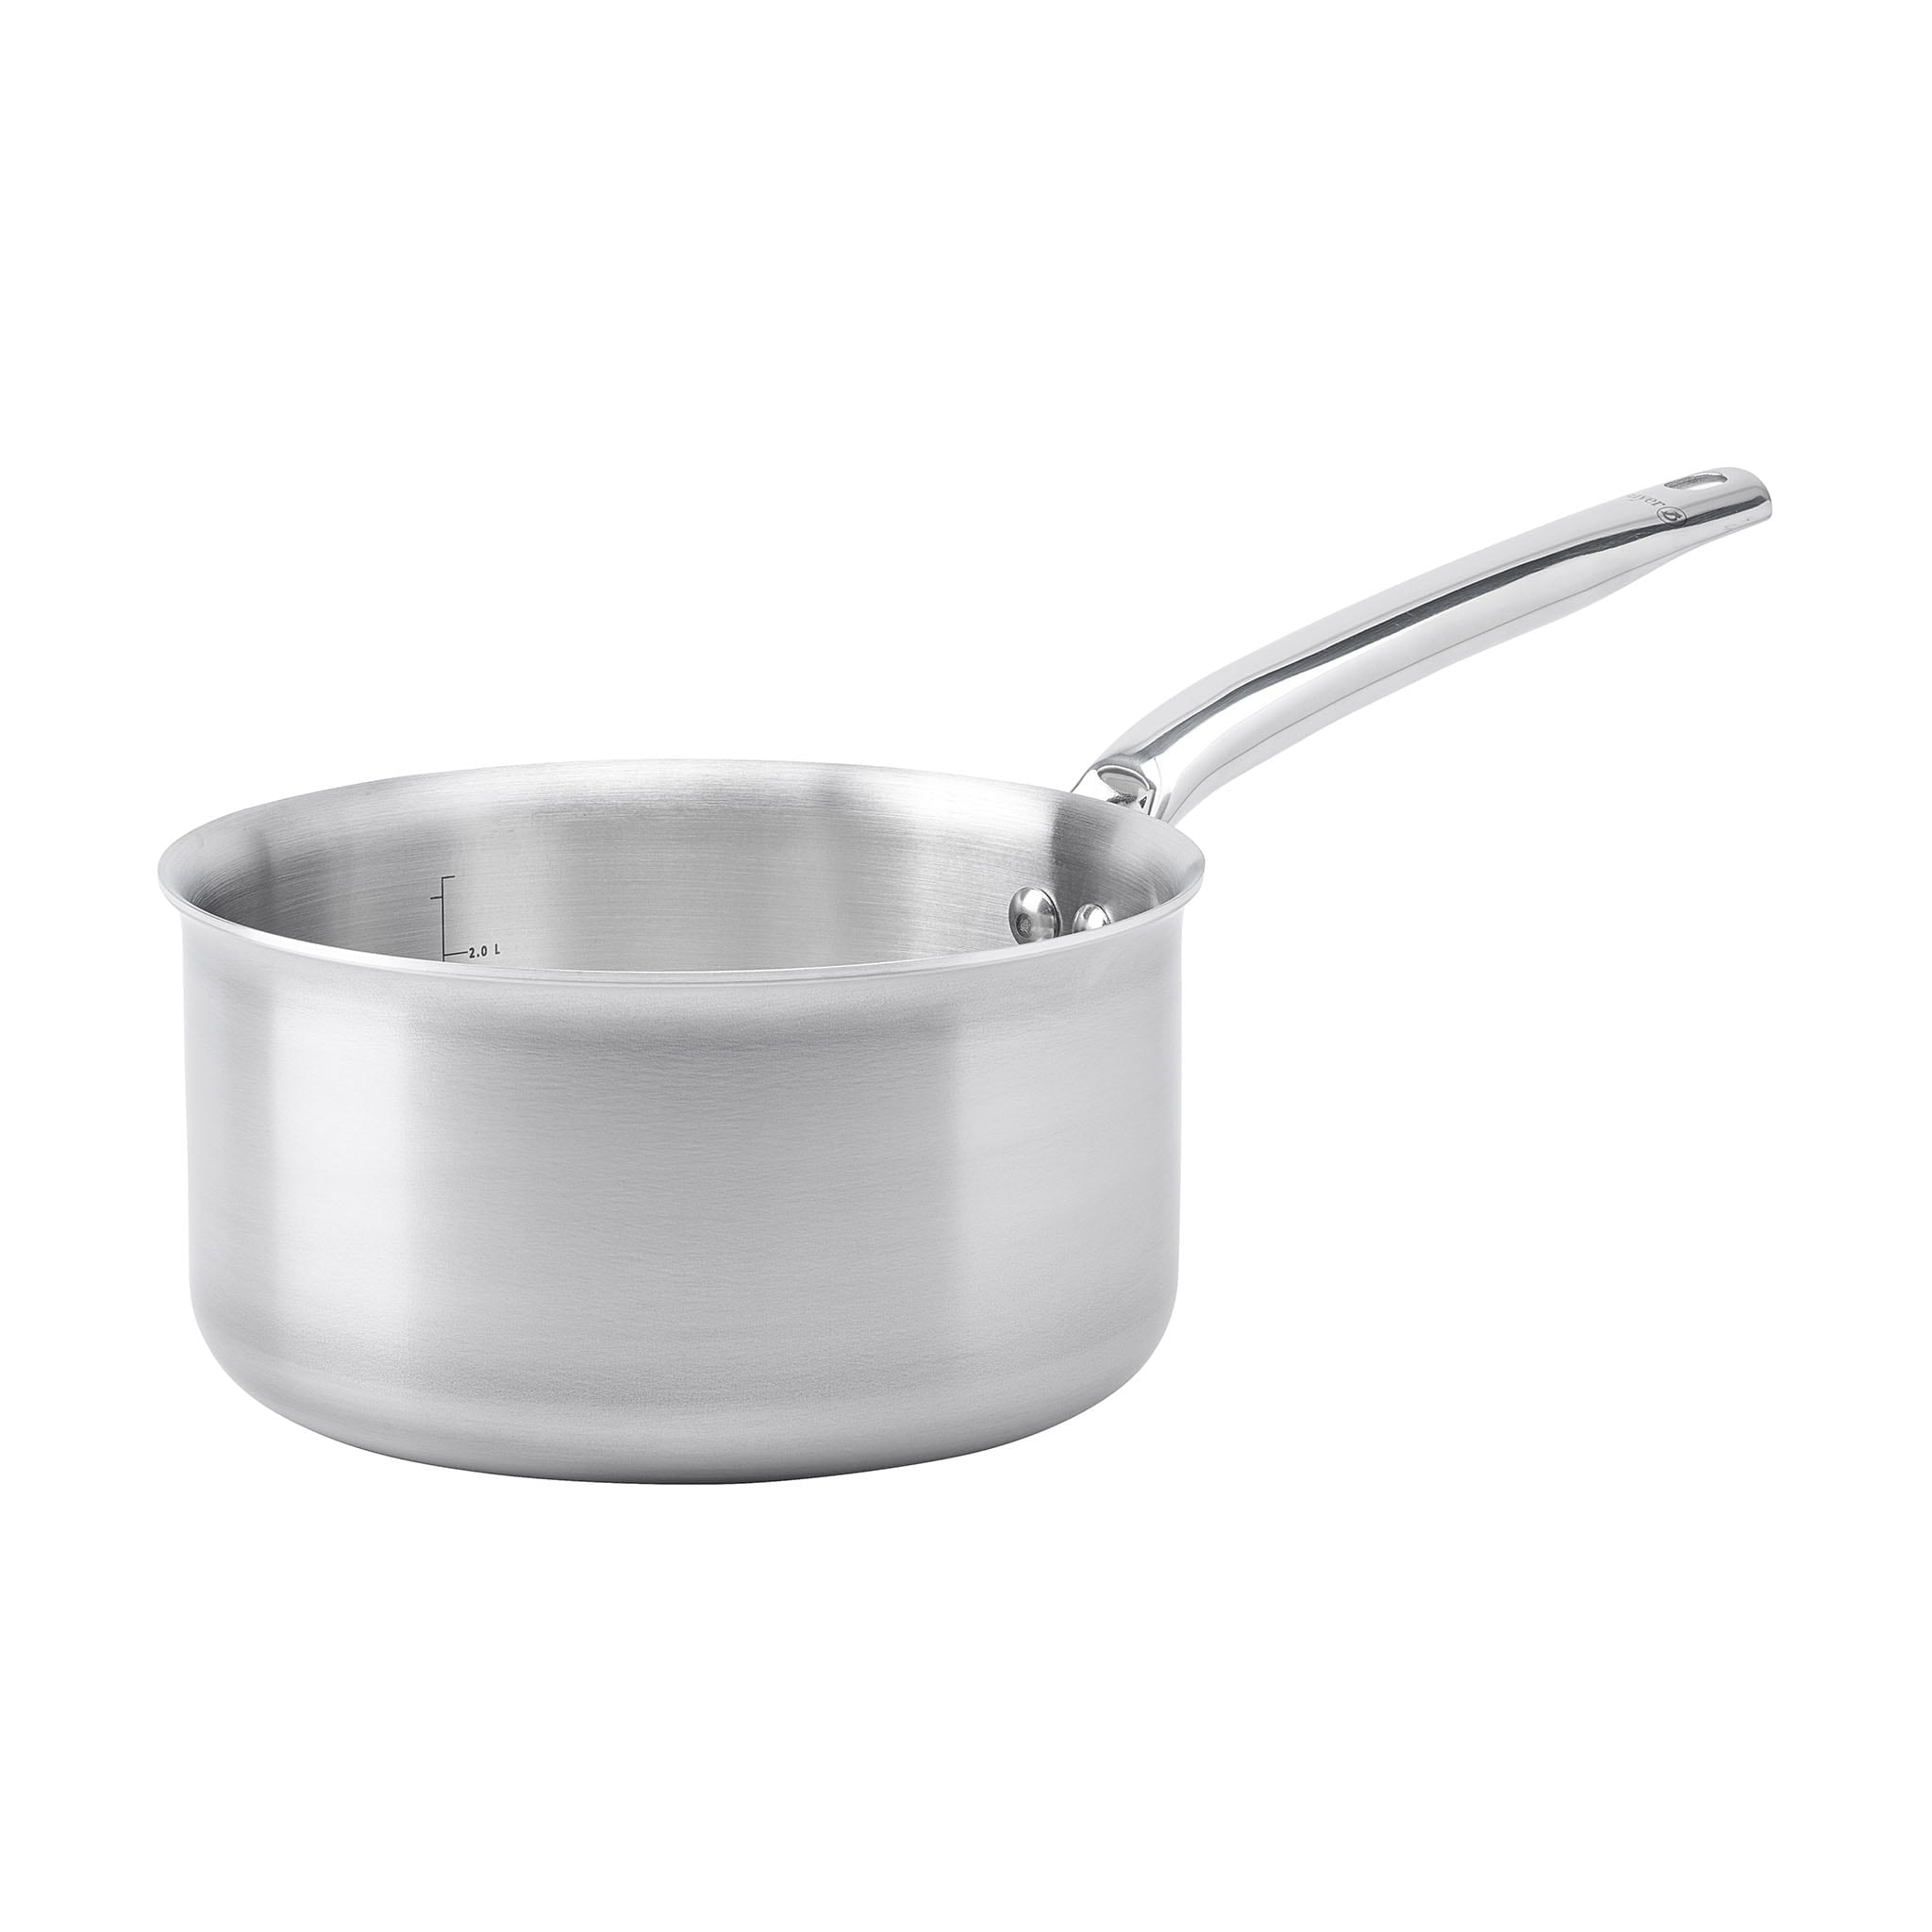 de Buyer Affinity frying pan 28cm 3724.28  Advantageously shopping at